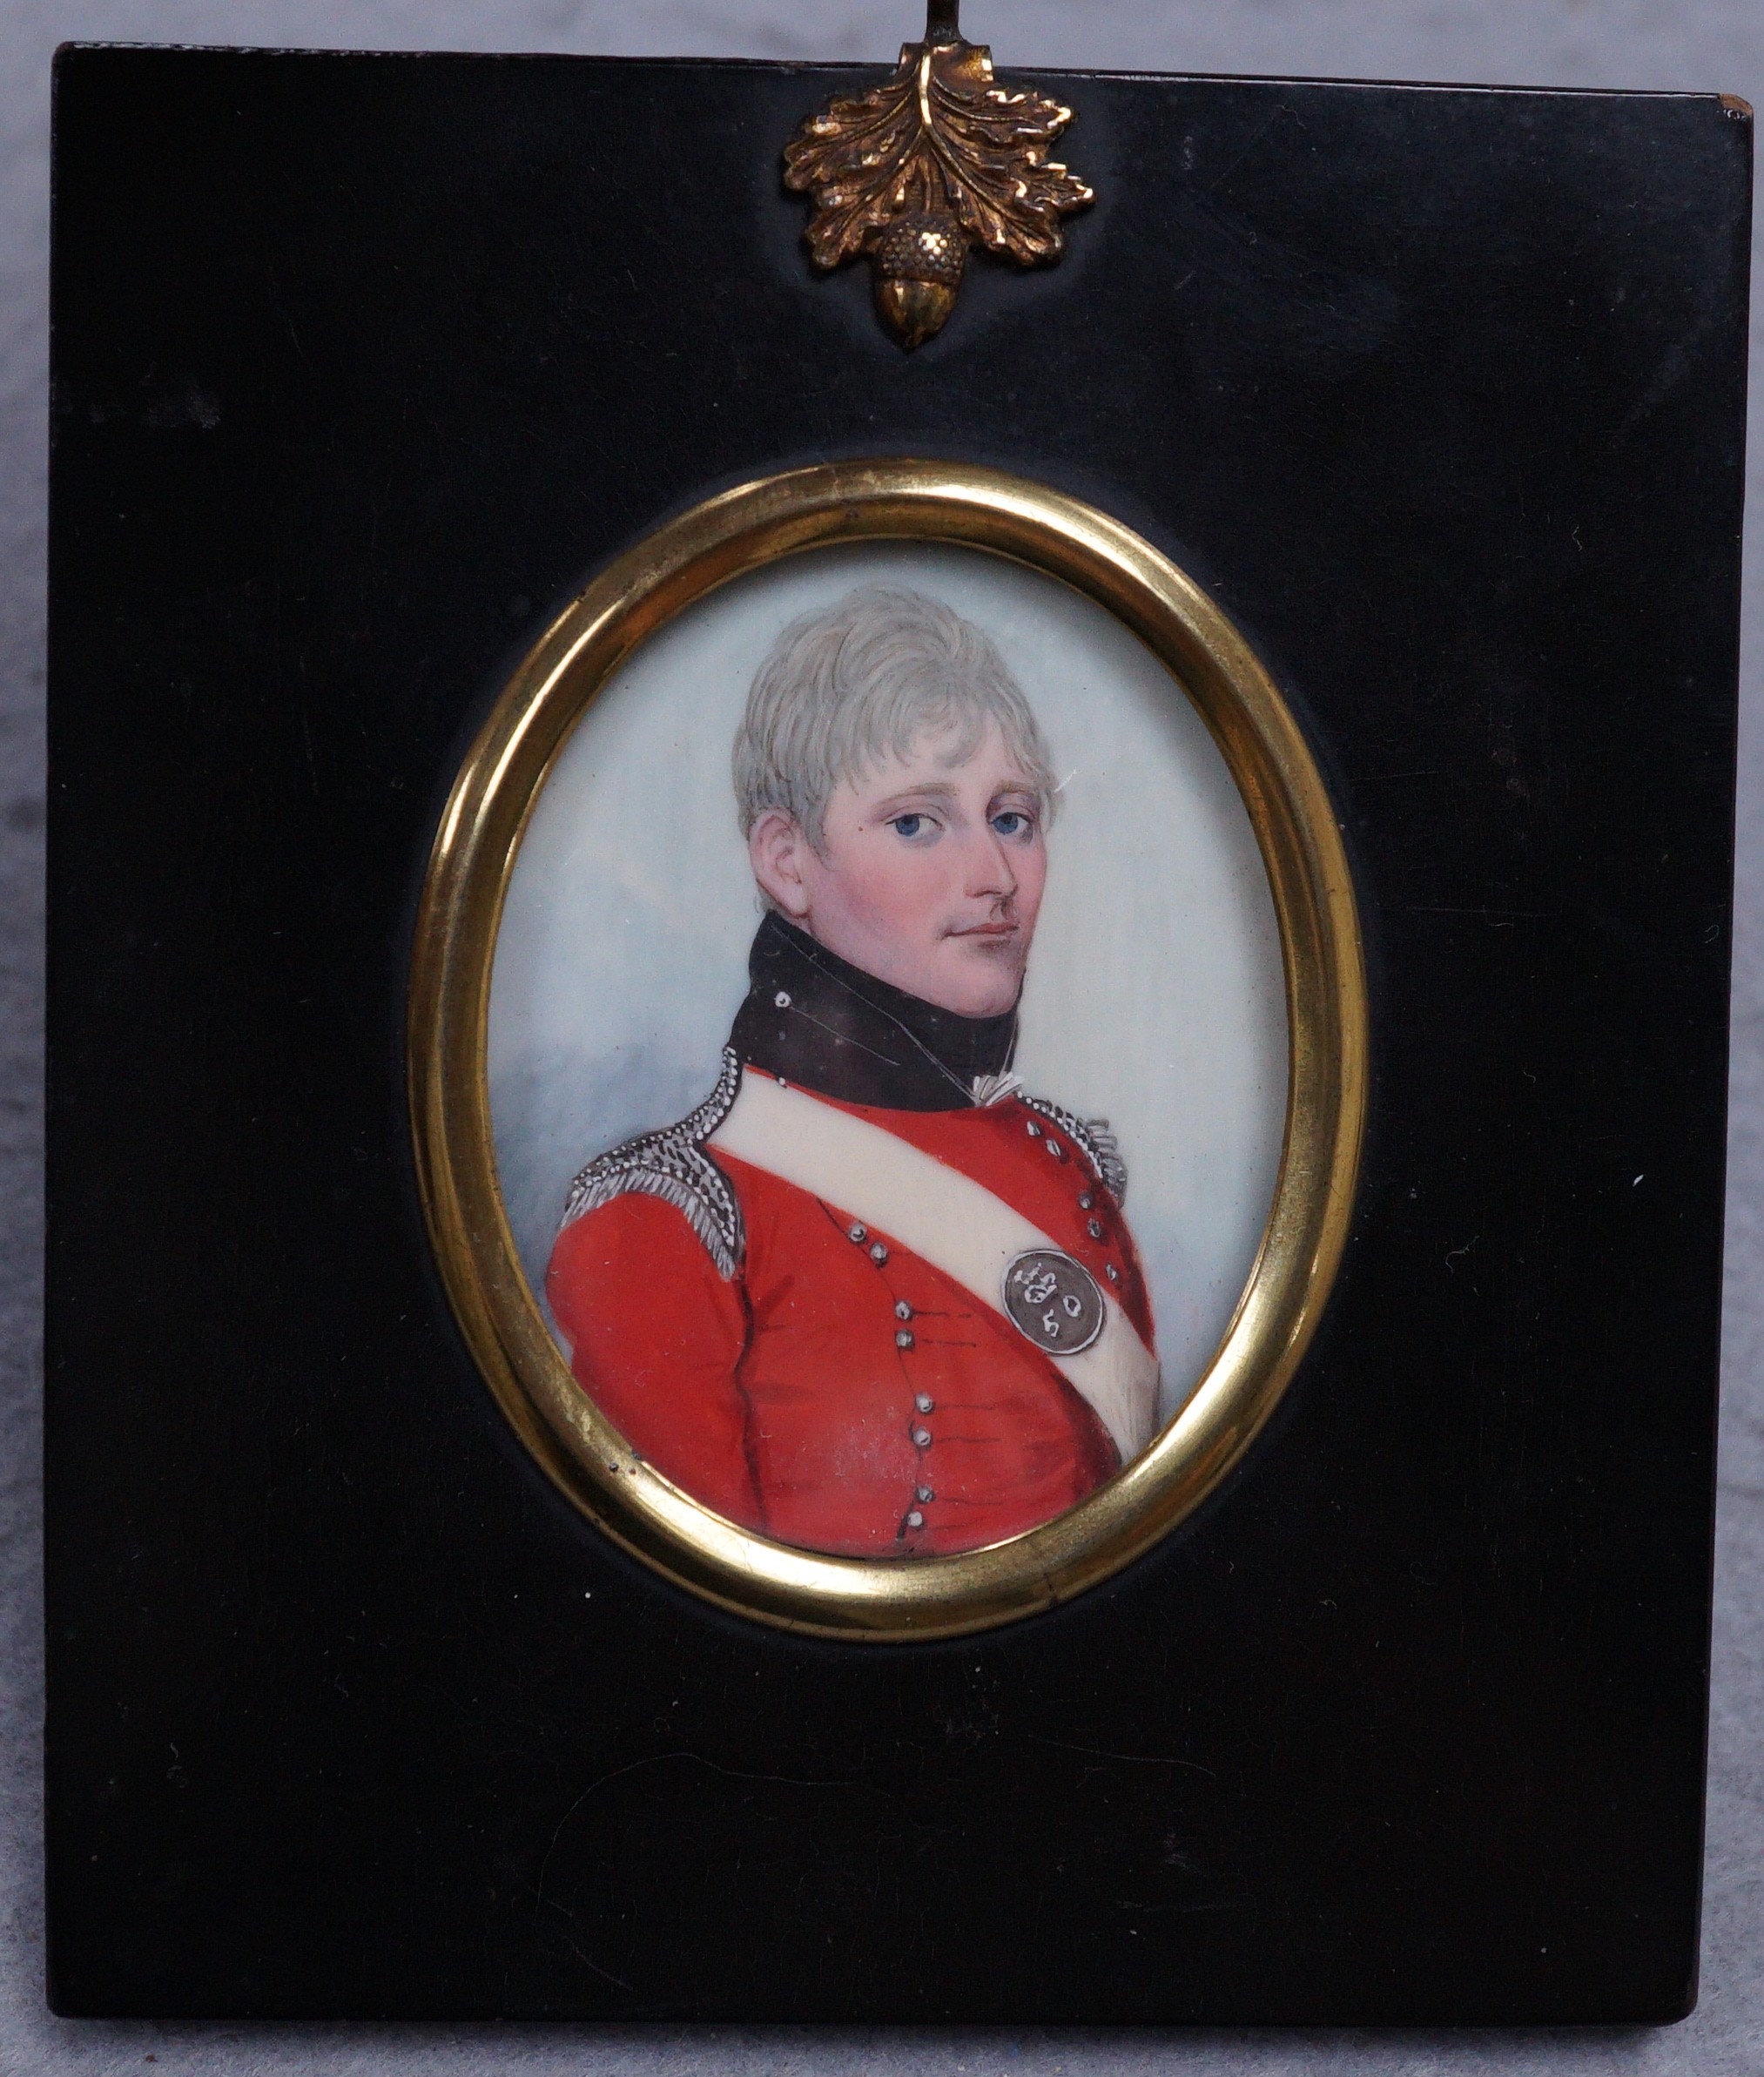 Attributed to Frederick Buck (Irish, 1771-1840), watercolour on ivory portrait miniature of an army officer, 6 x 5cm